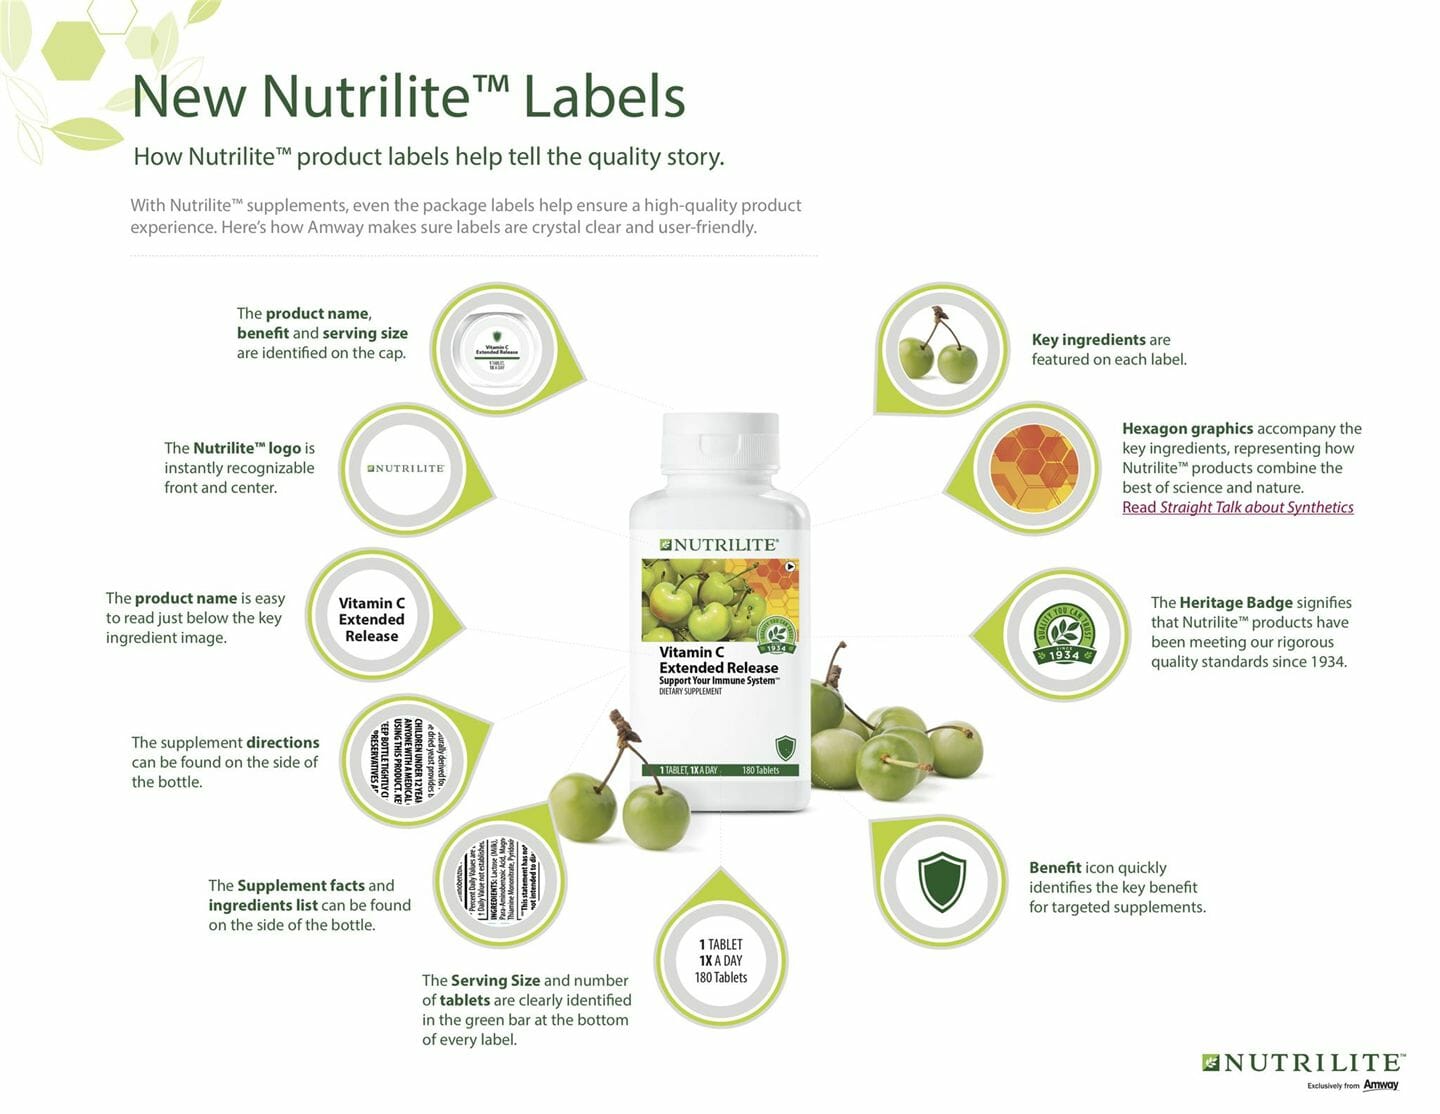 How Nutrilite product labels help tell the quality story